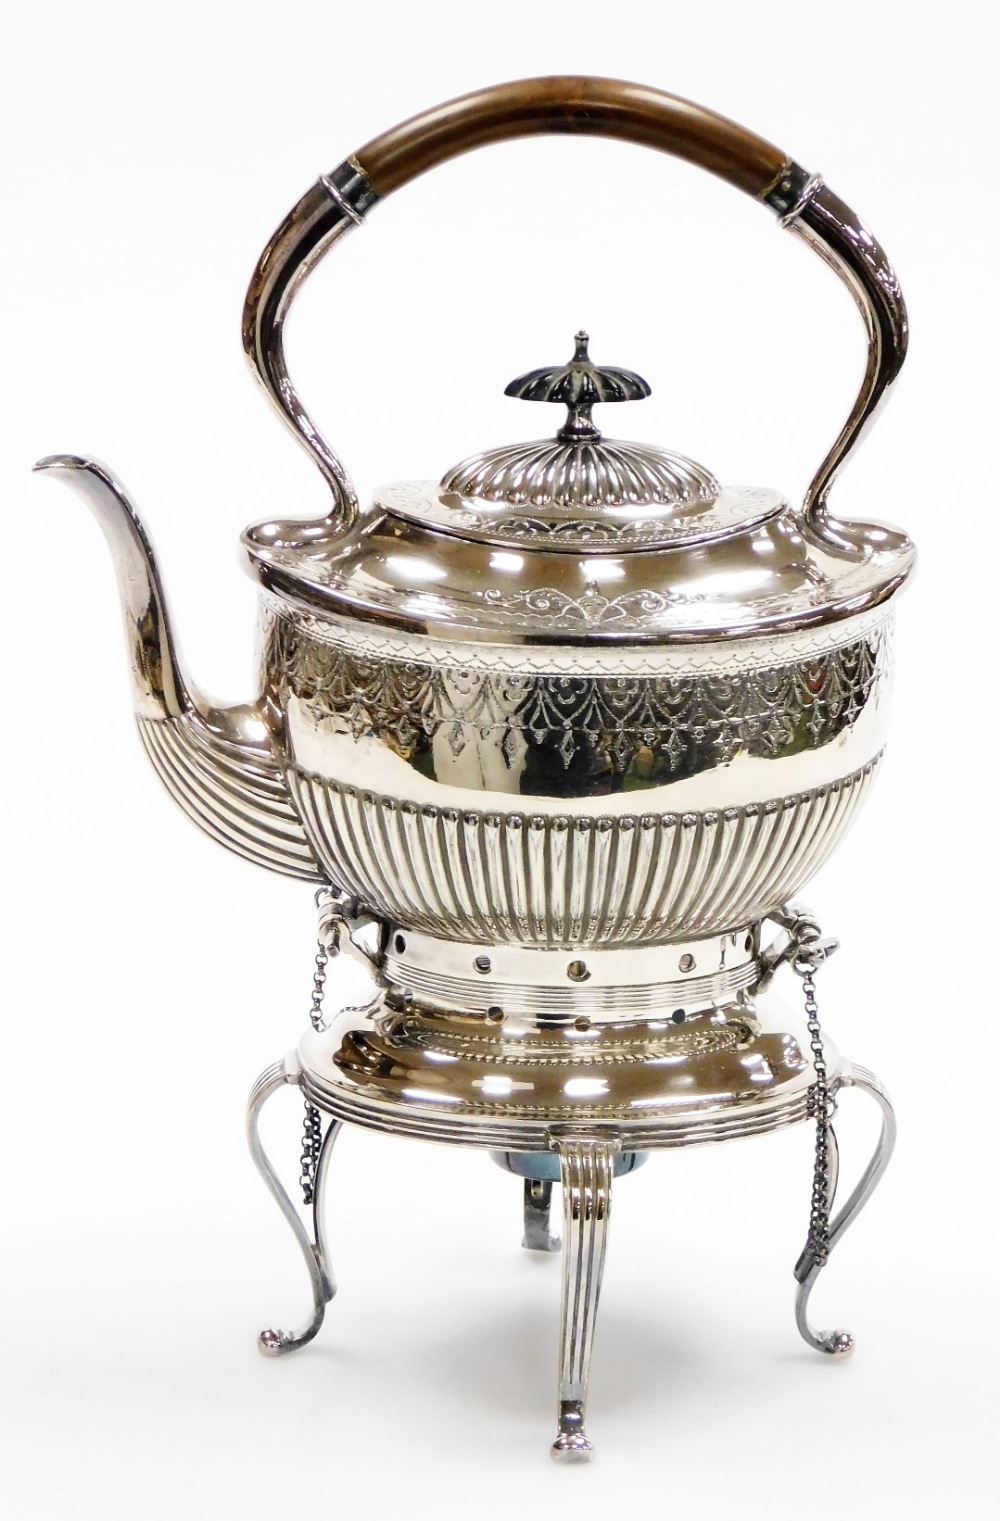 A James Dixon electro plated kettle on stand, with a bentwood handle, ebonised knop, and engraved an